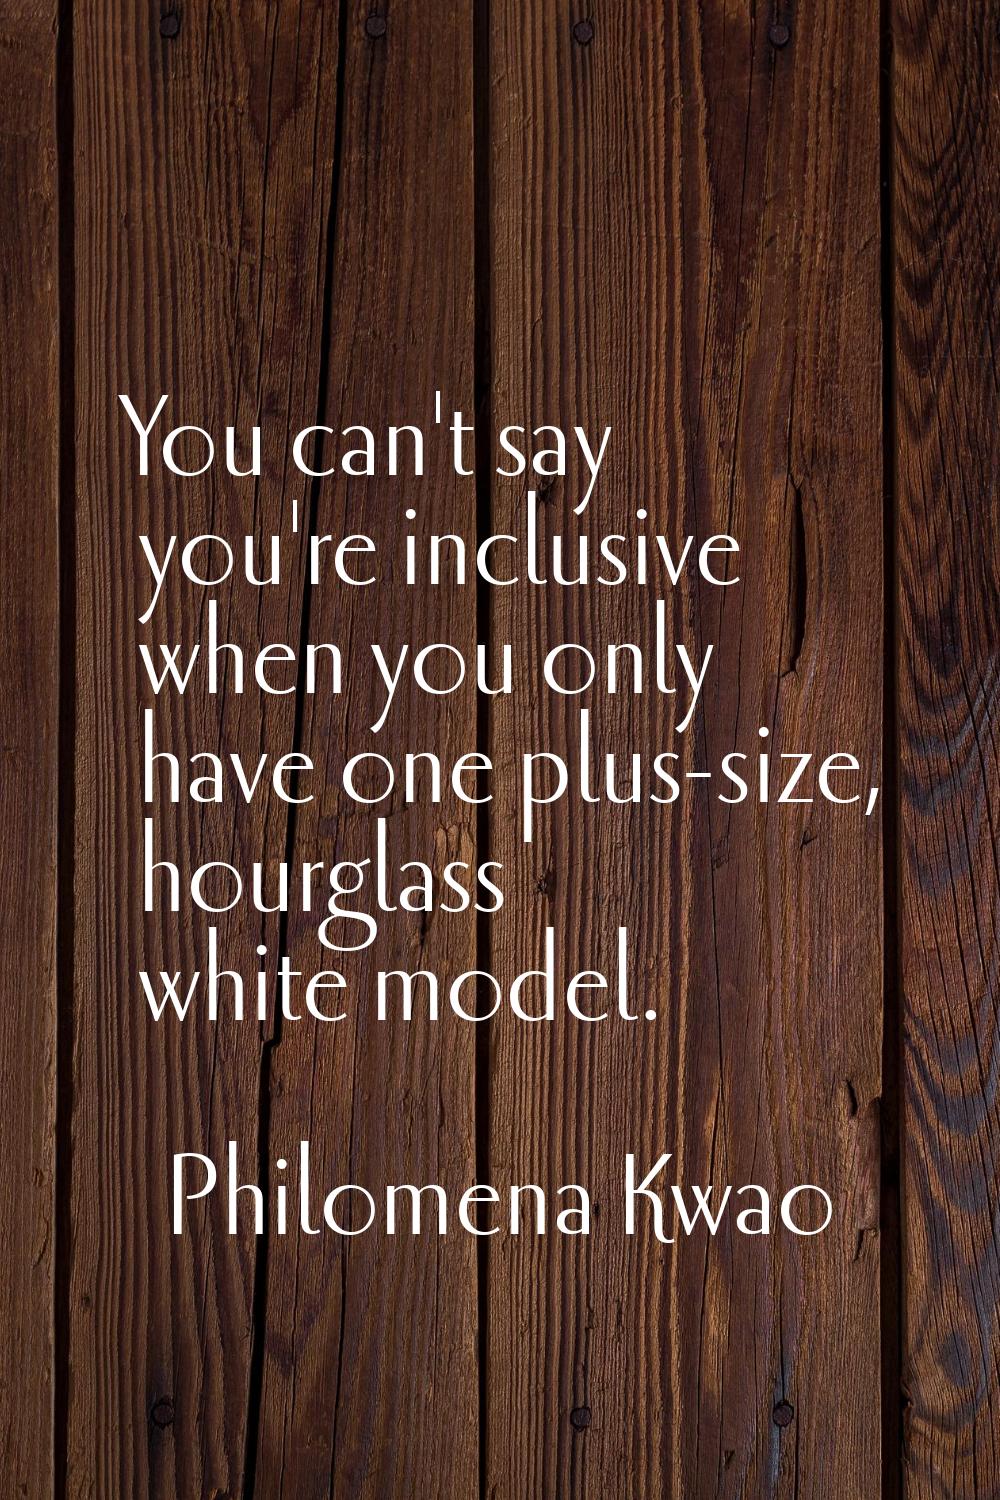 You can't say you're inclusive when you only have one plus-size, hourglass white model.